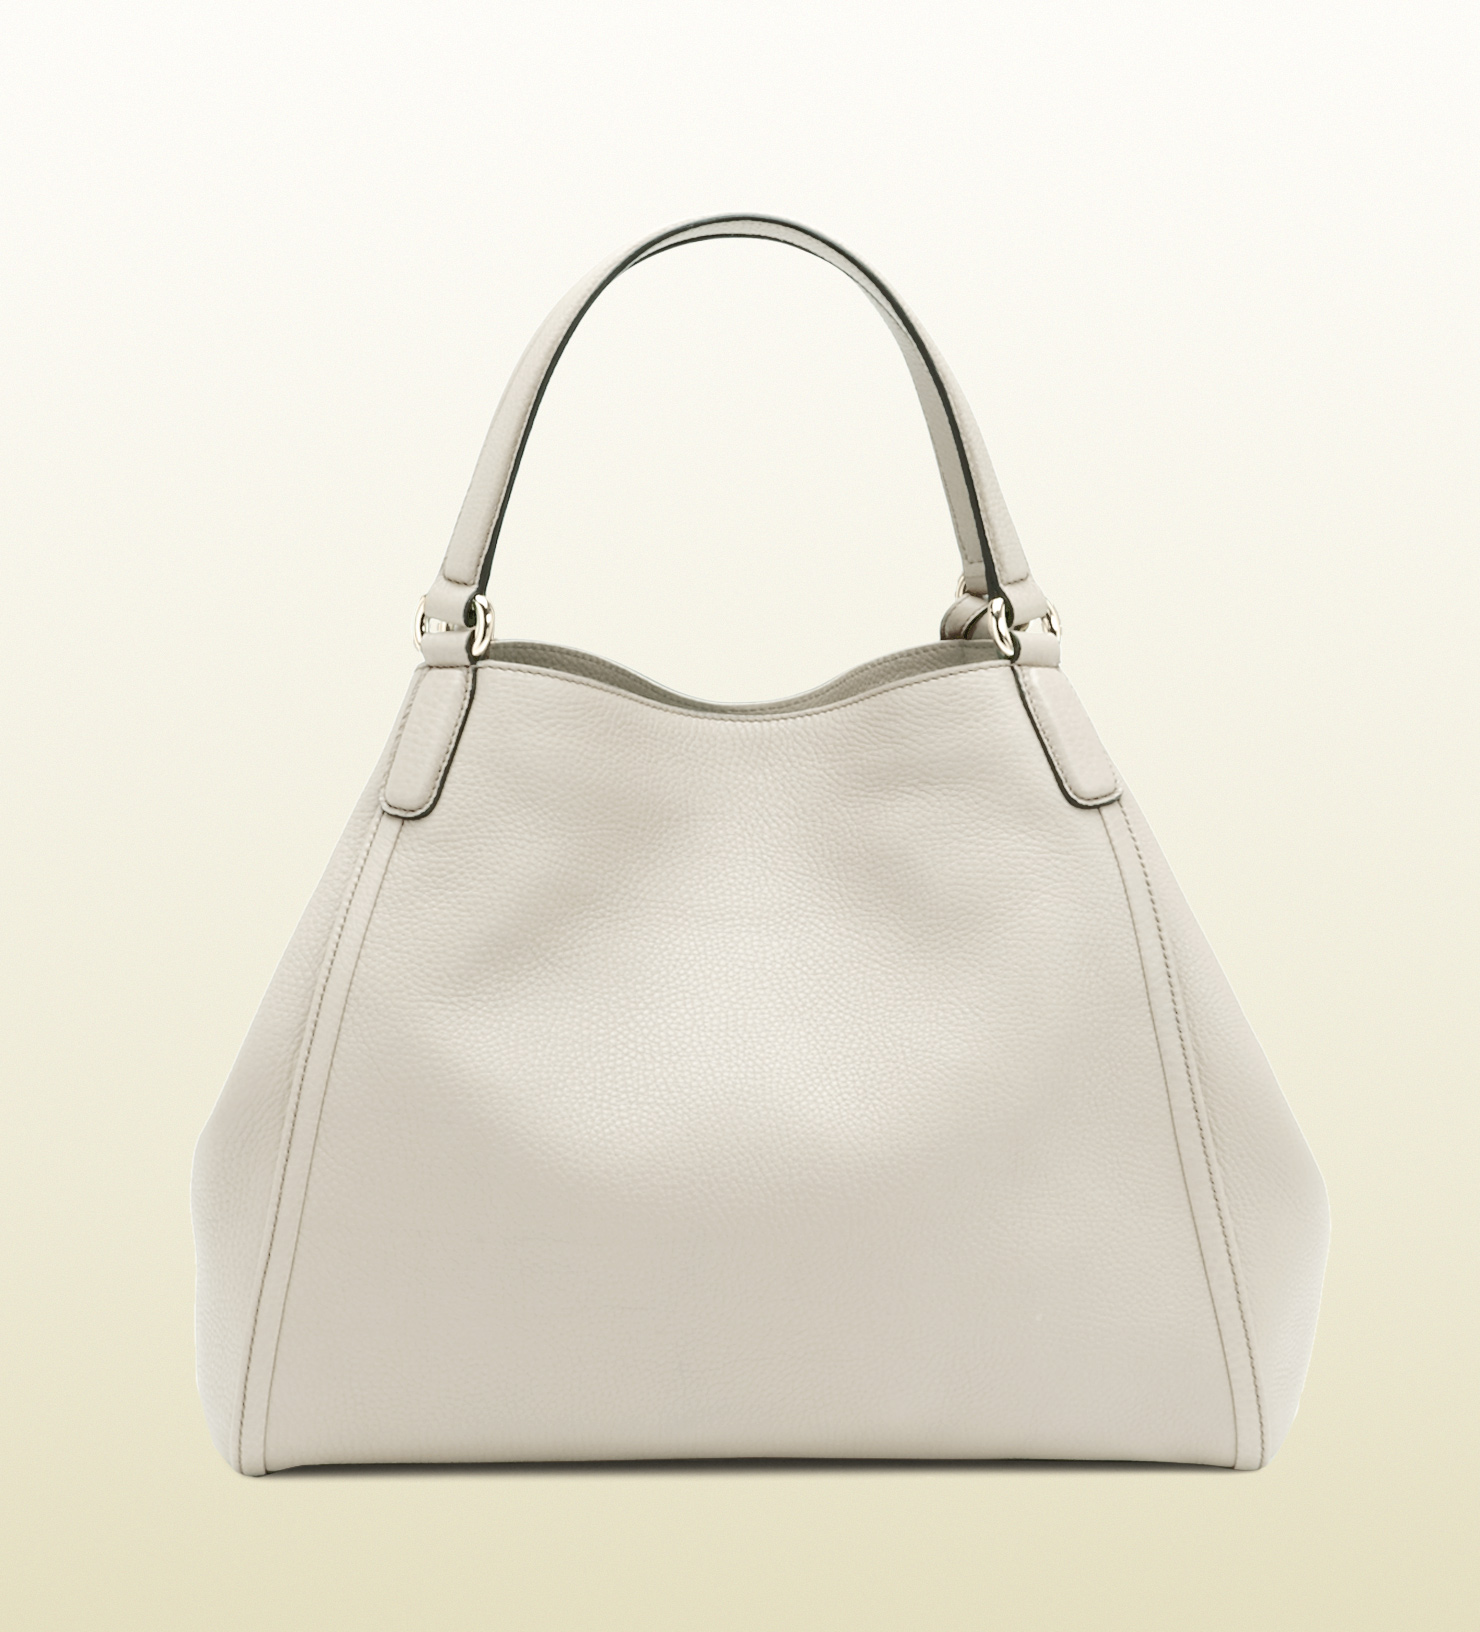 Lyst - Gucci Soho Leather Shoulder Bag in White